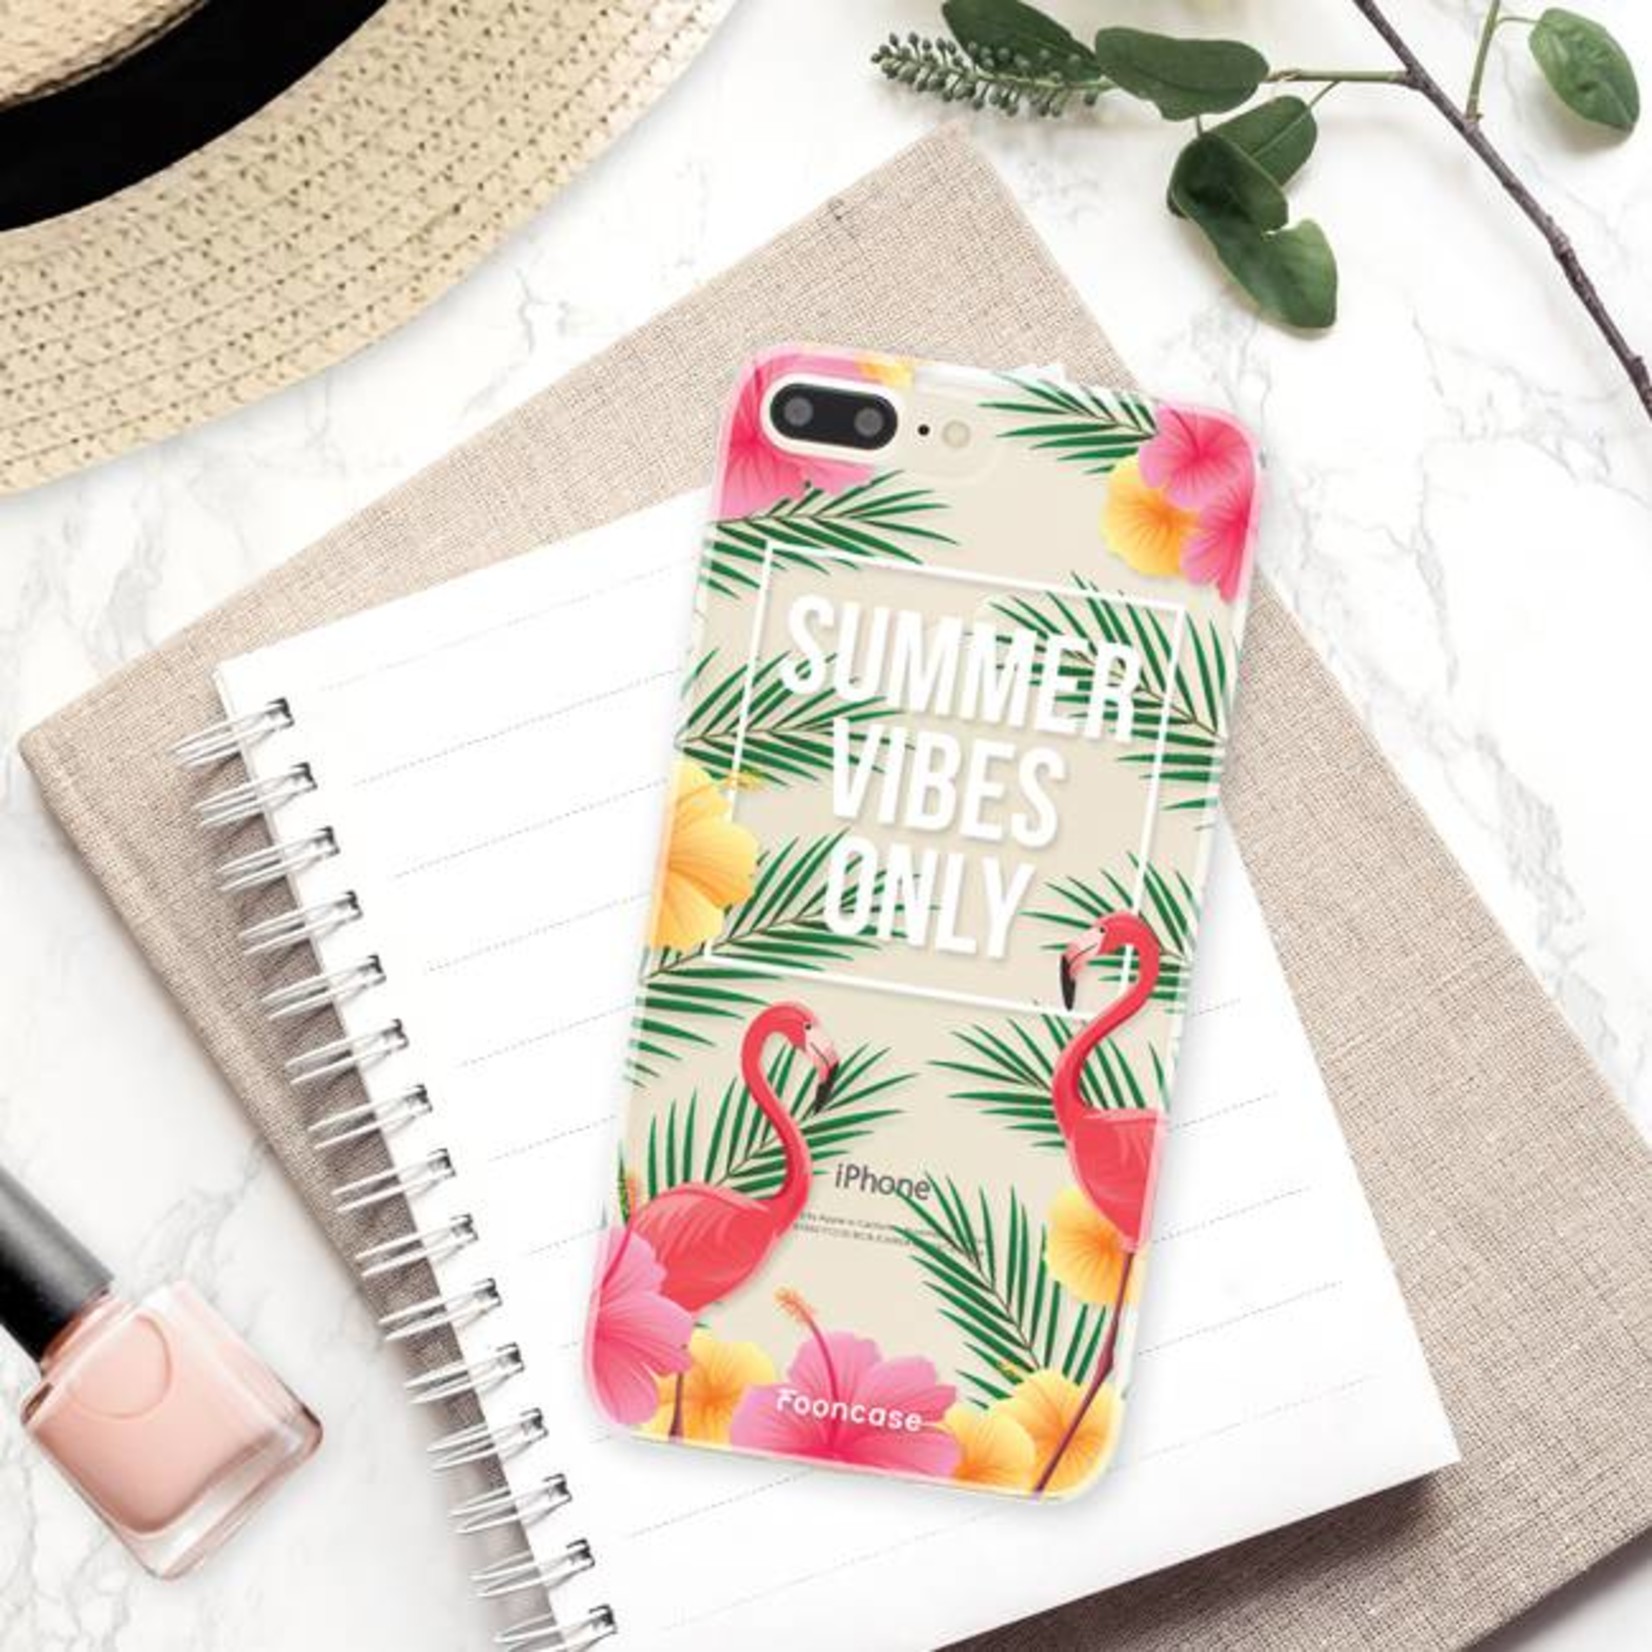 FOONCASE Iphone 8 Plus Cover - Summer Vibes Only